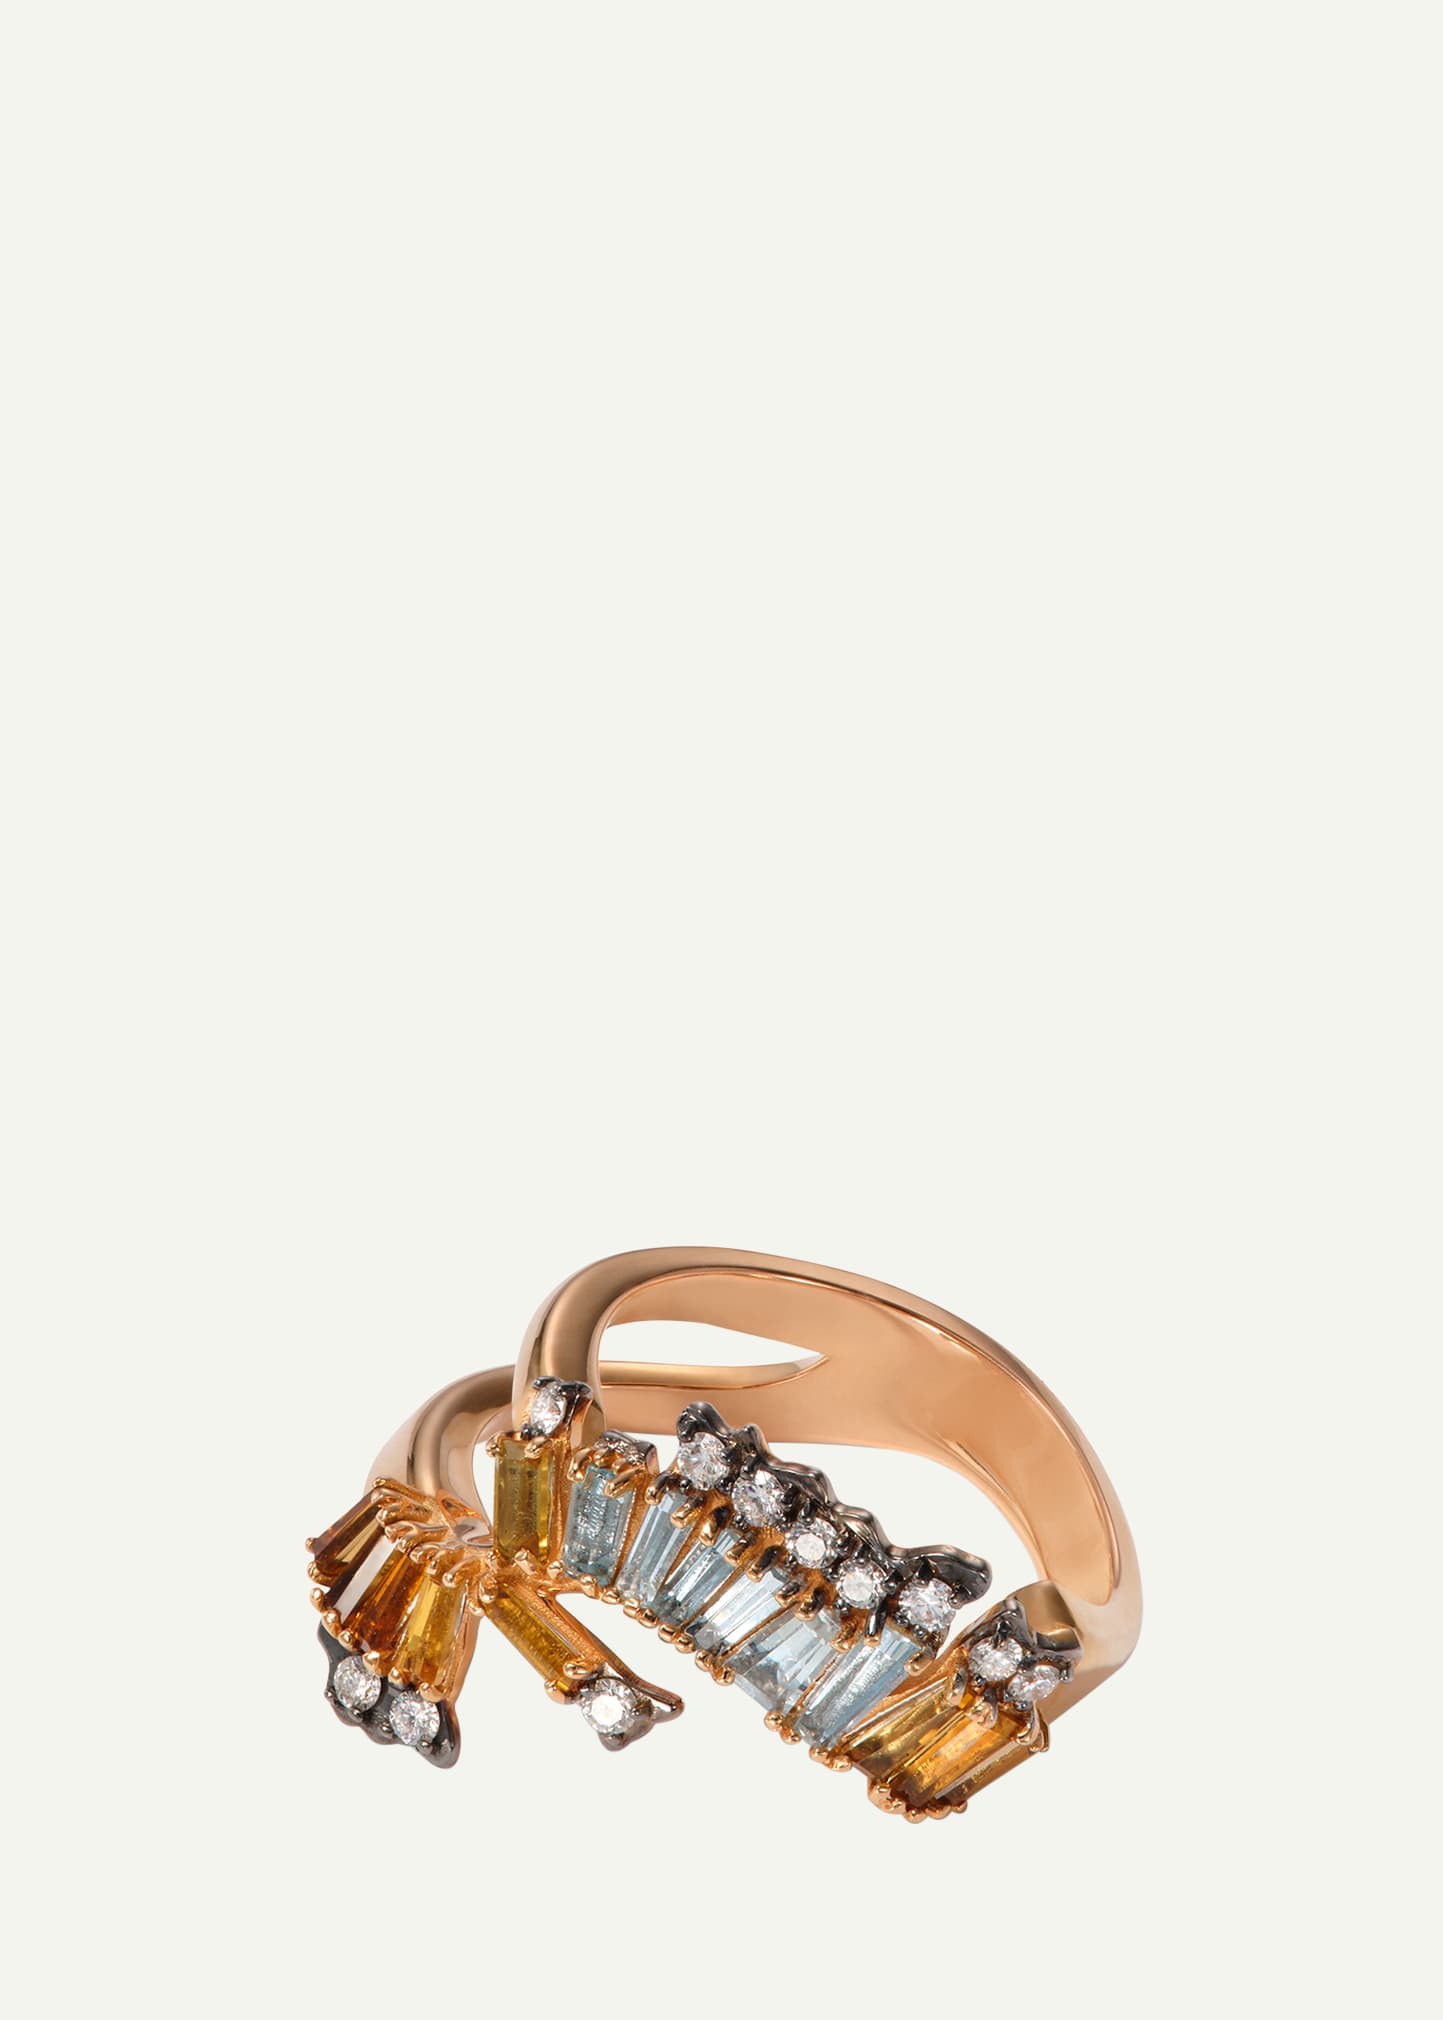 20K Rose Gold Abstra Ruched Ring with White Diamonds, Aquamarine and Golden Tourmaline